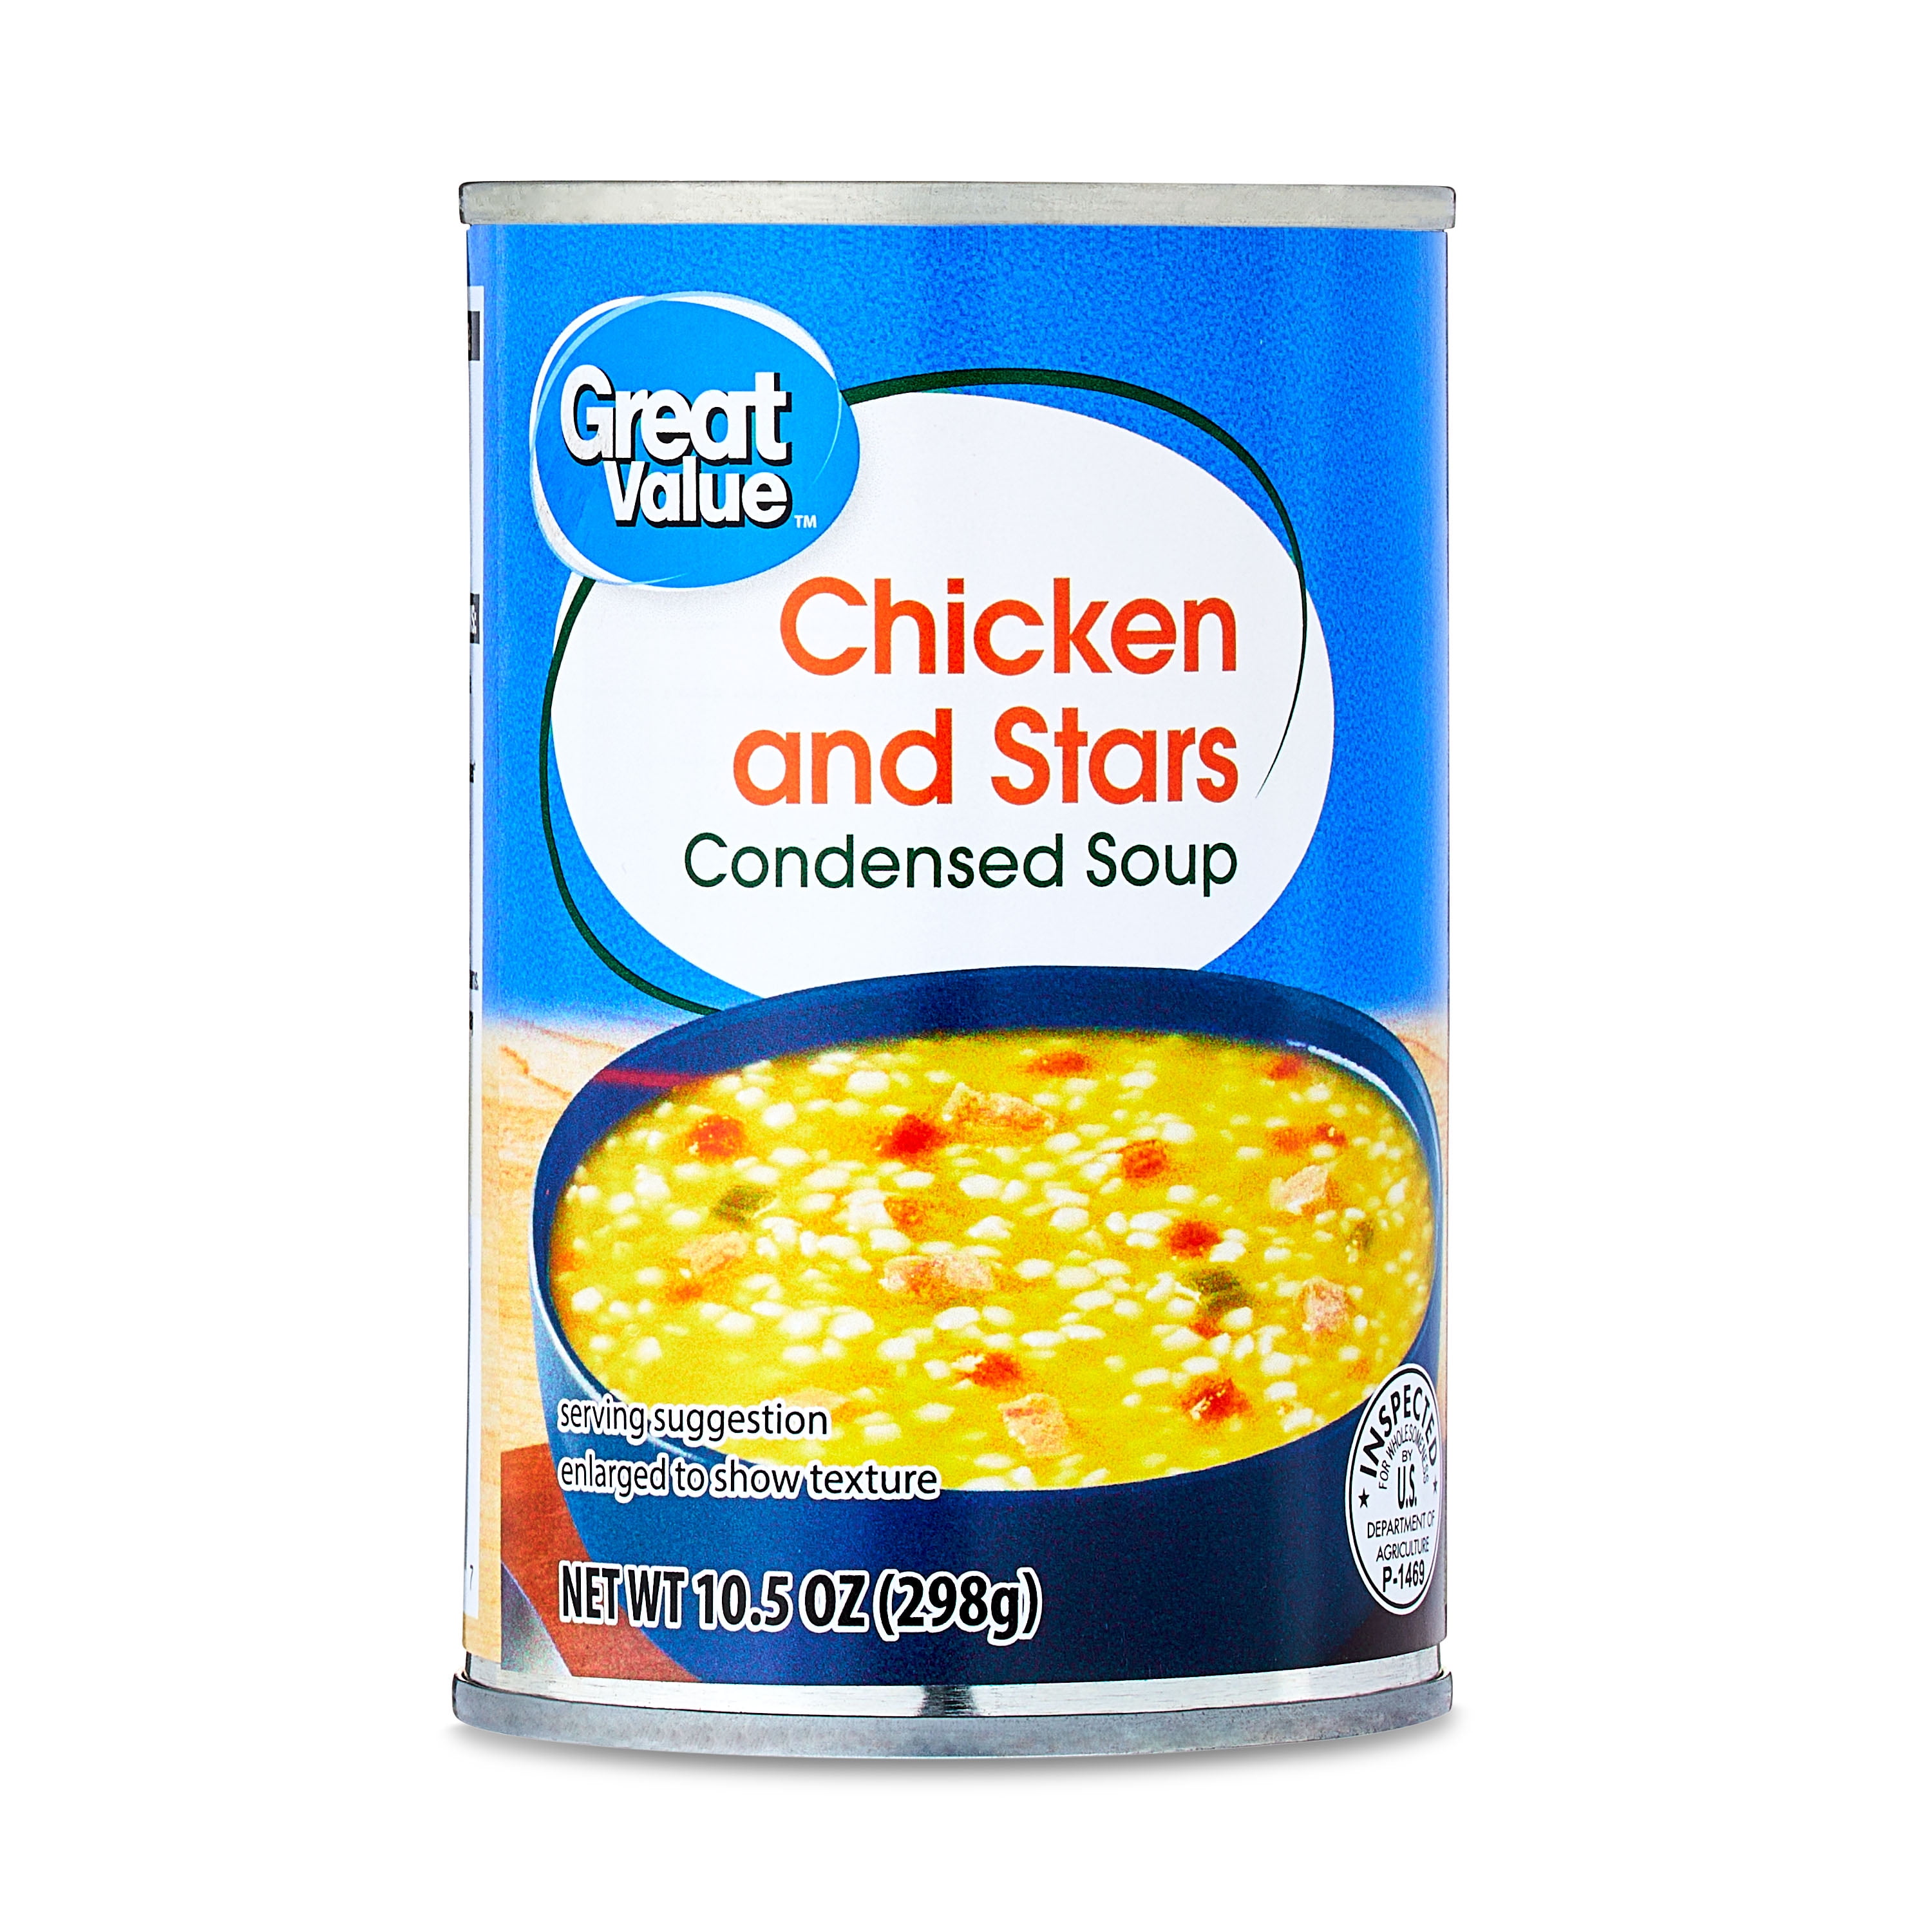 Great Value Chicken and Stars Condensed Soup, 10.5 oz pic